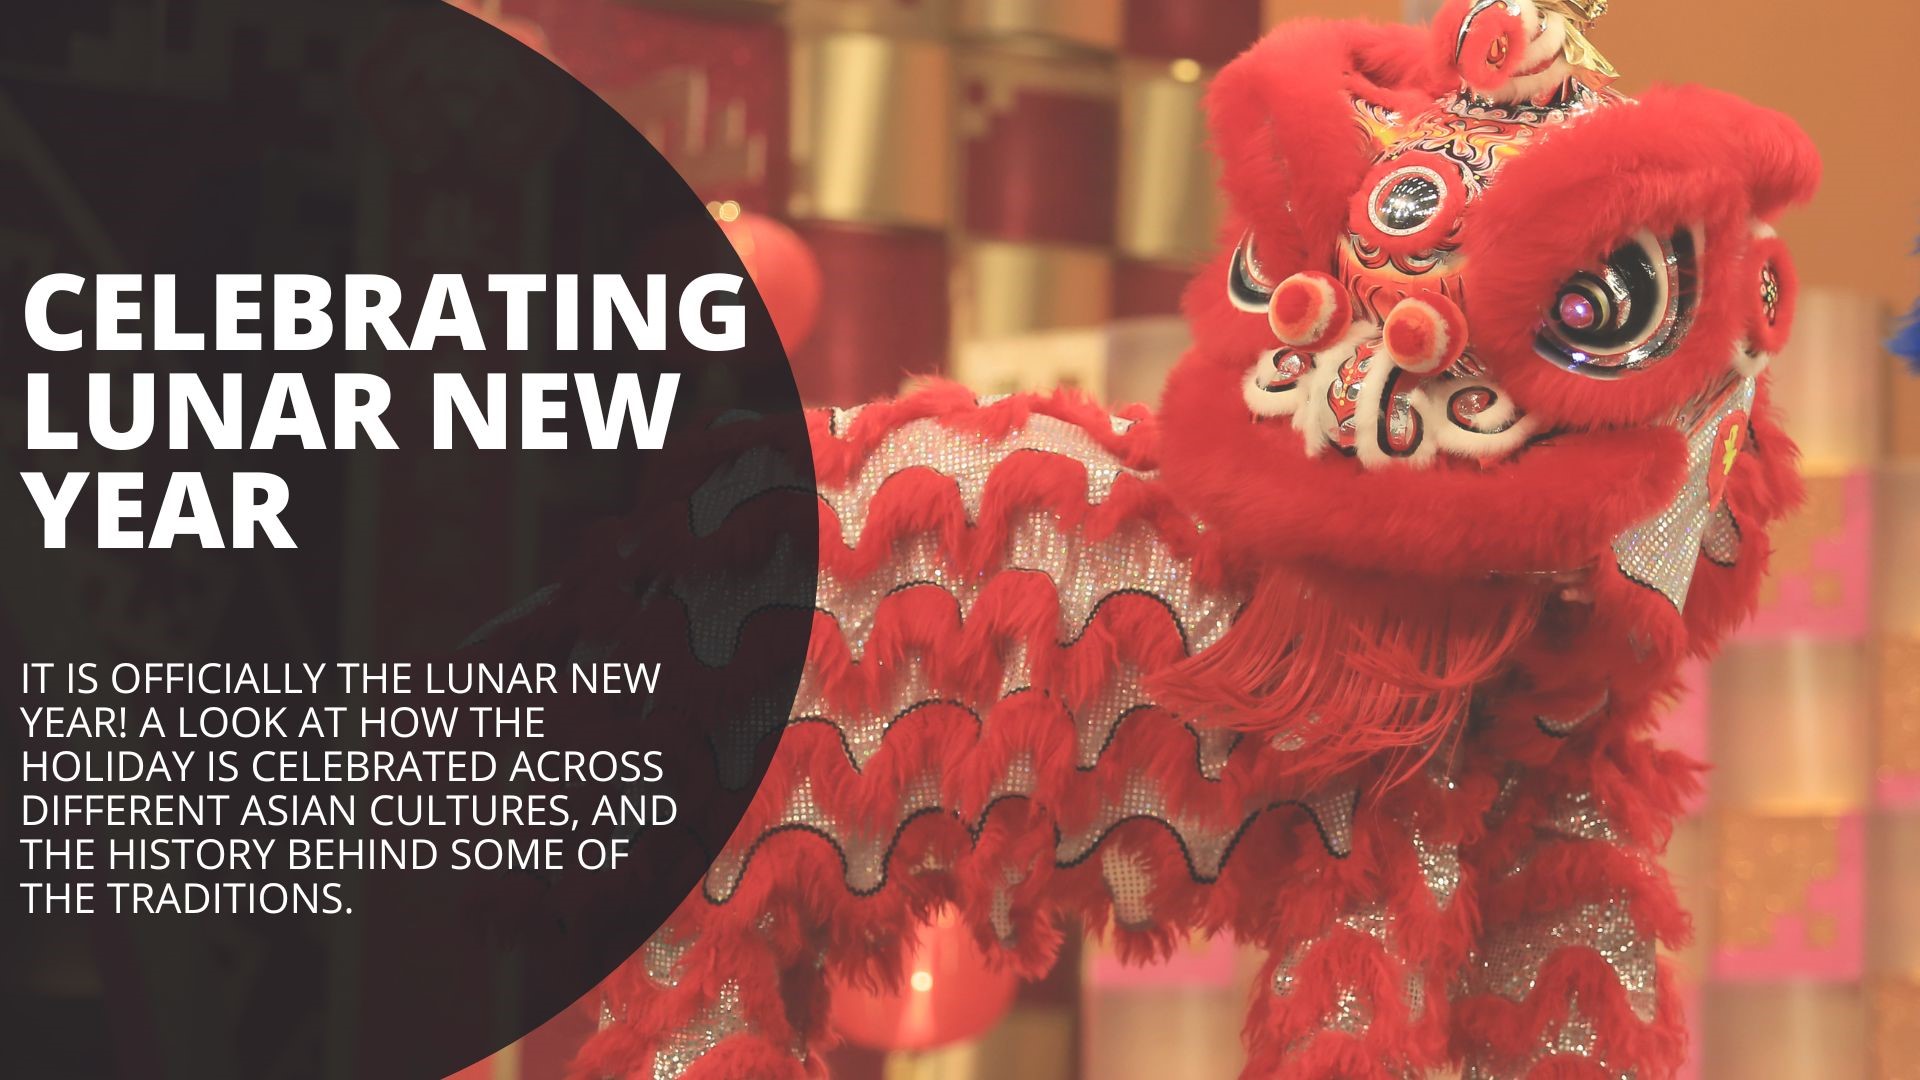 It is officially the Lunar New Year! A look at how the holiday is celebrated across different Asian cultures, and the history behind some of the traditions.